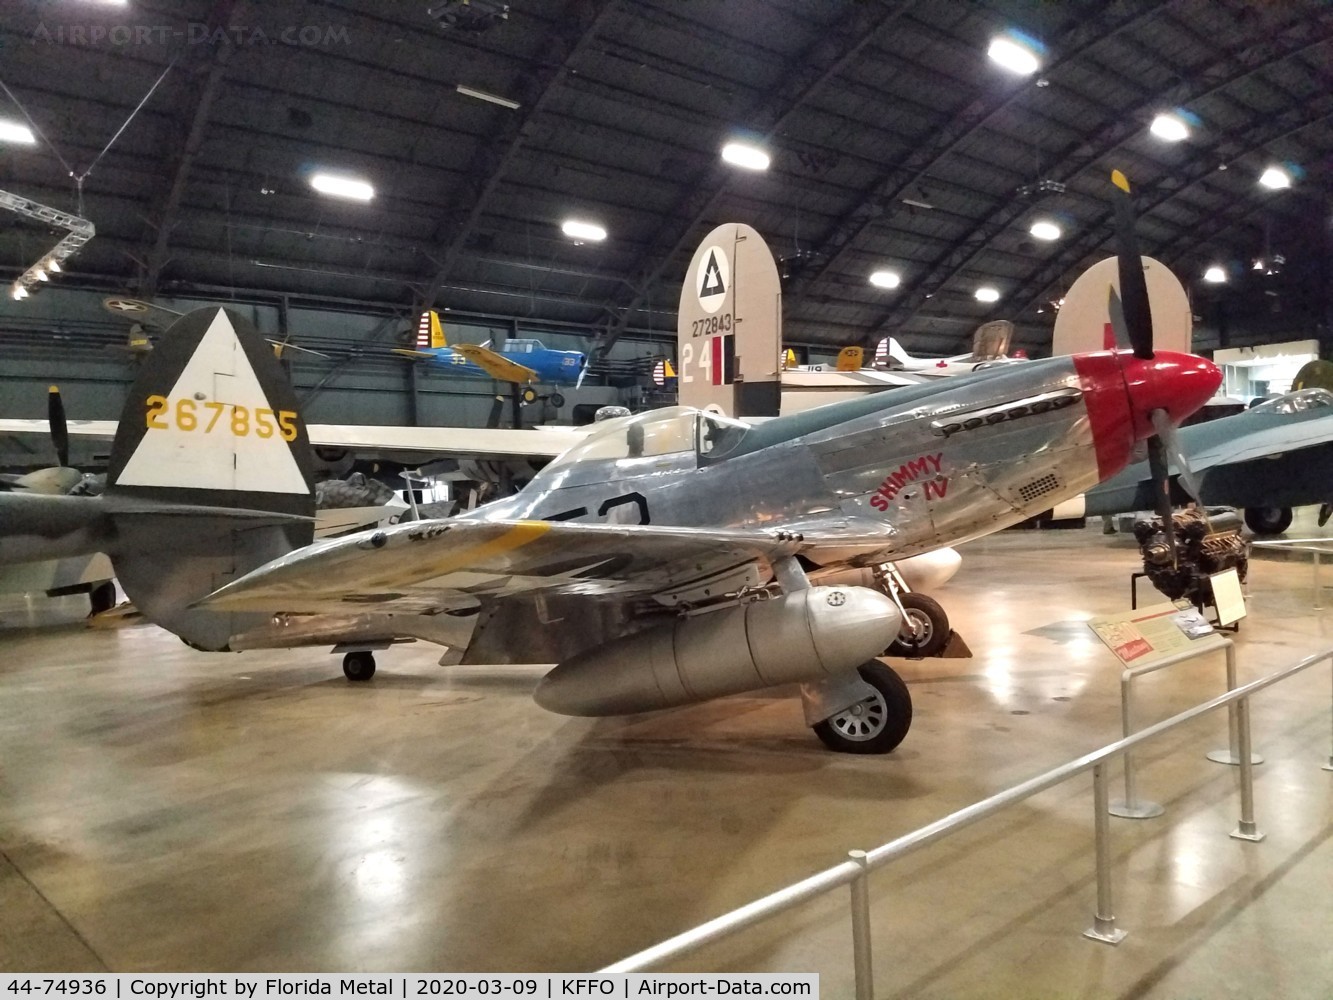 44-74936, 1944 North American P-51D-30-NA Mustang C/N 122-41476, P-51D zx